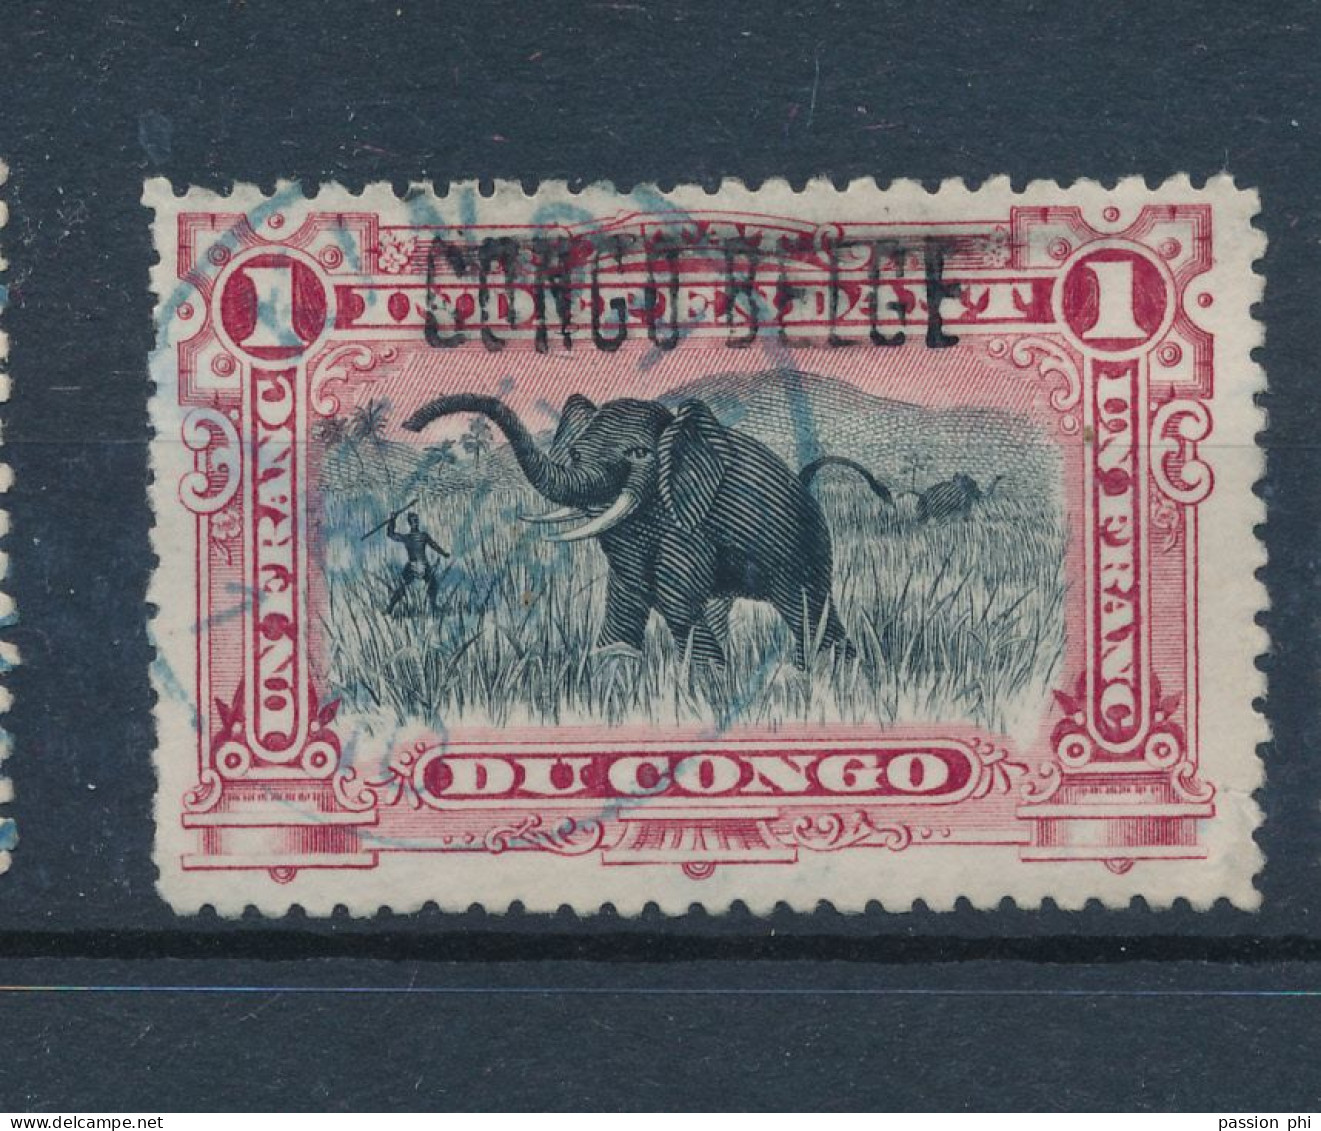 BELGIAN CONGO 1909 ISSUE COB 36L6 USED - Used Stamps